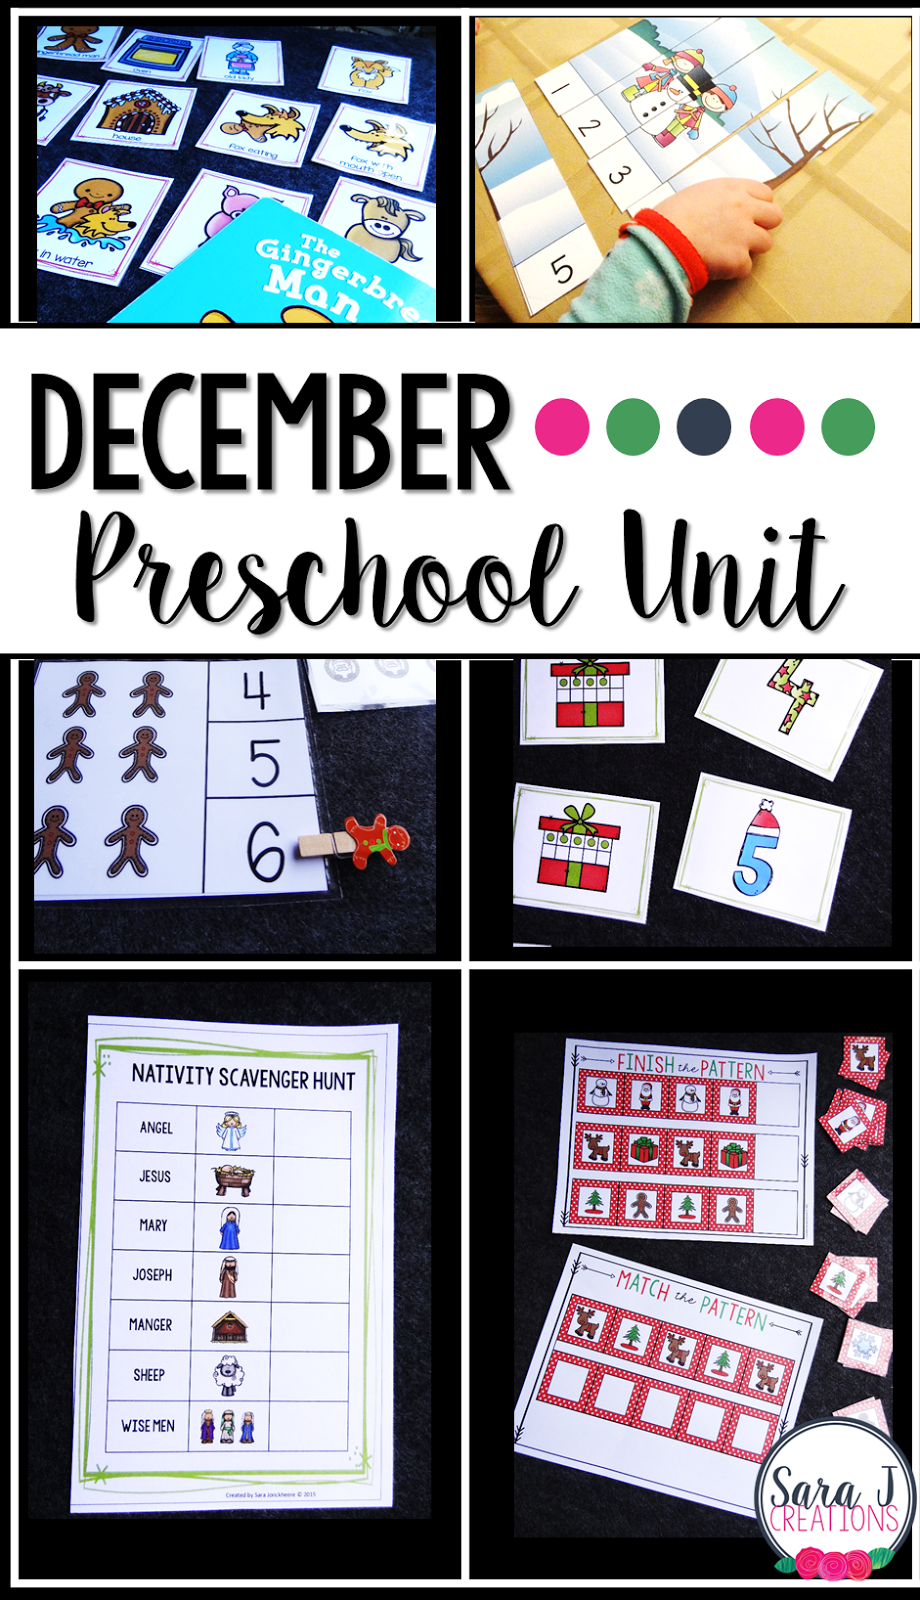 Preschool and kindergarten activities with a Christmas theme.Practice patterning, letter and number identification, counting, sequencing and more! 